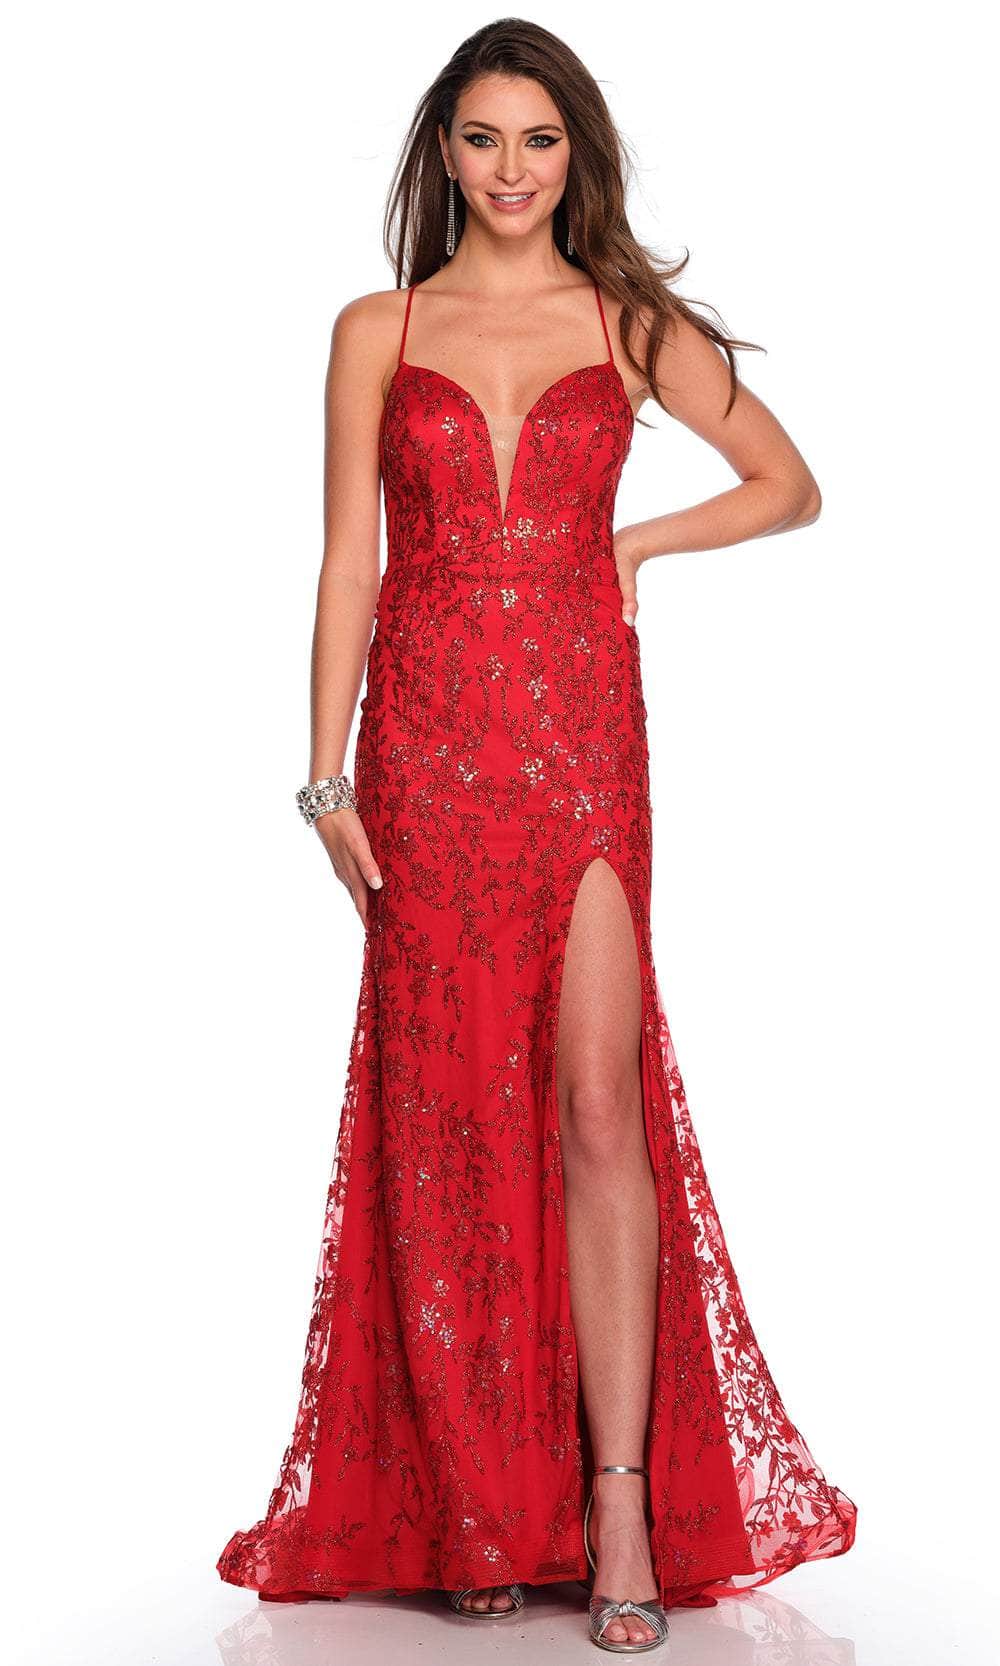 Dave & Johnny 11203 - Glitter Print Plunging Prom Gown
